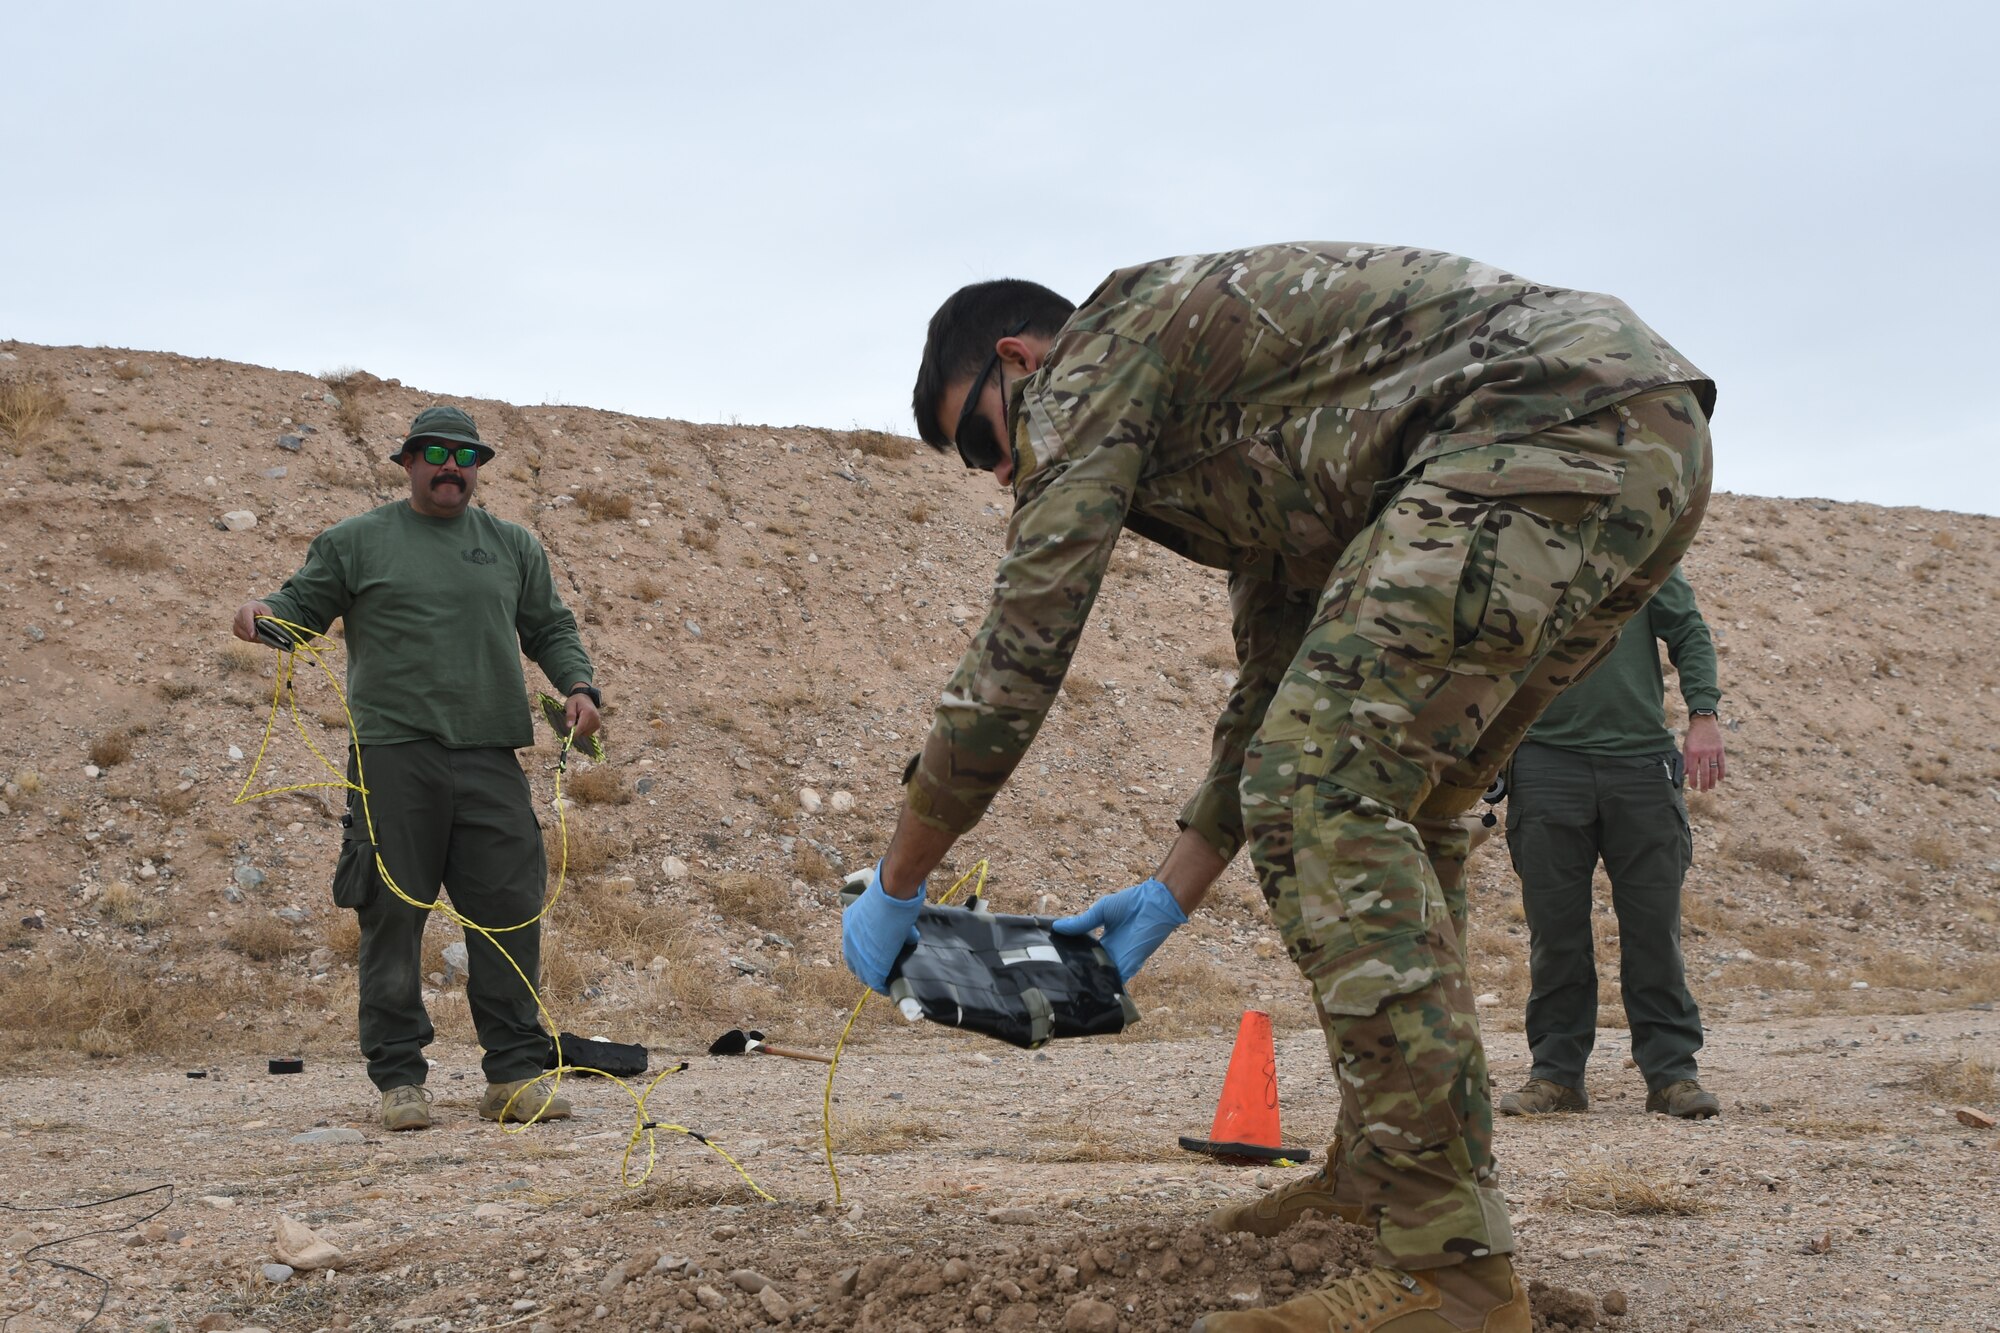 A picture of an Airman planting an explosive.